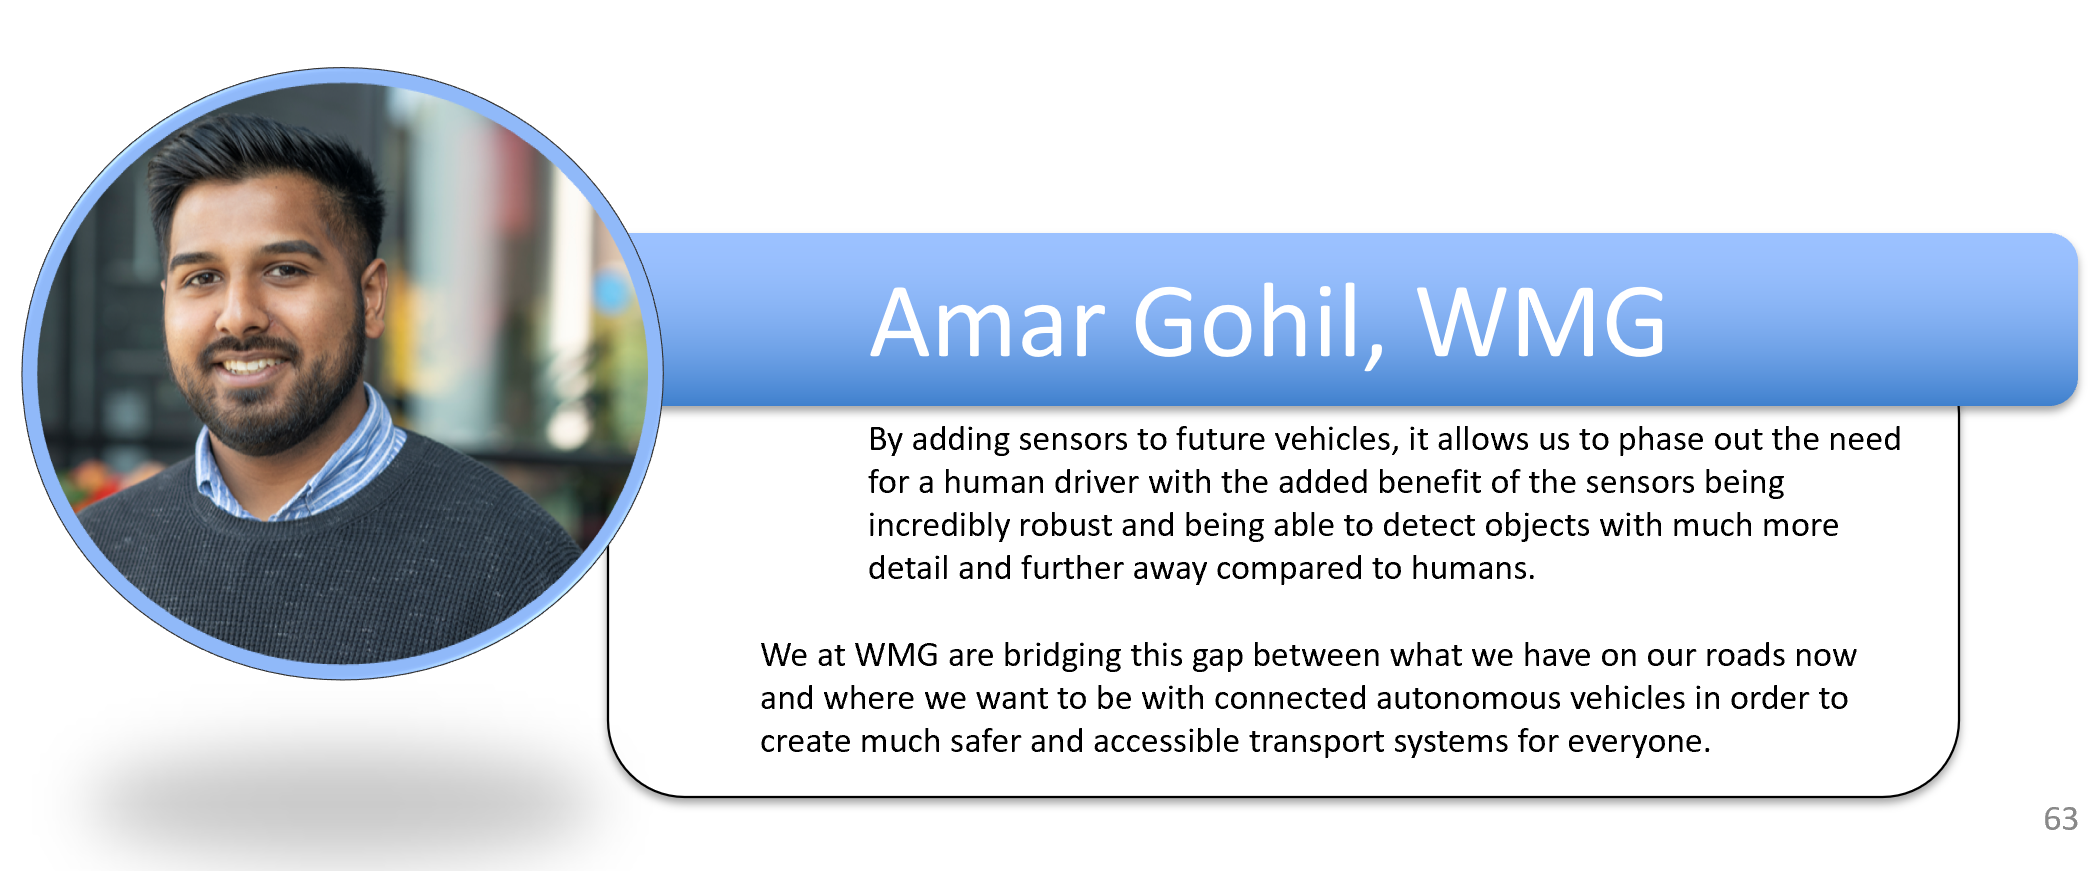 By adding sensors to future vehicles, it allows us to phase out the need for a human driver with the added benefit of the sensors being incredibly robust and being able to detect objects with much more detail and further away compared to humans. We at WMG are bridging this gap between what we have on our roads now and where we want to be with connected autonomous vehicles in order to create much safer and accessible transport systems for everyone.